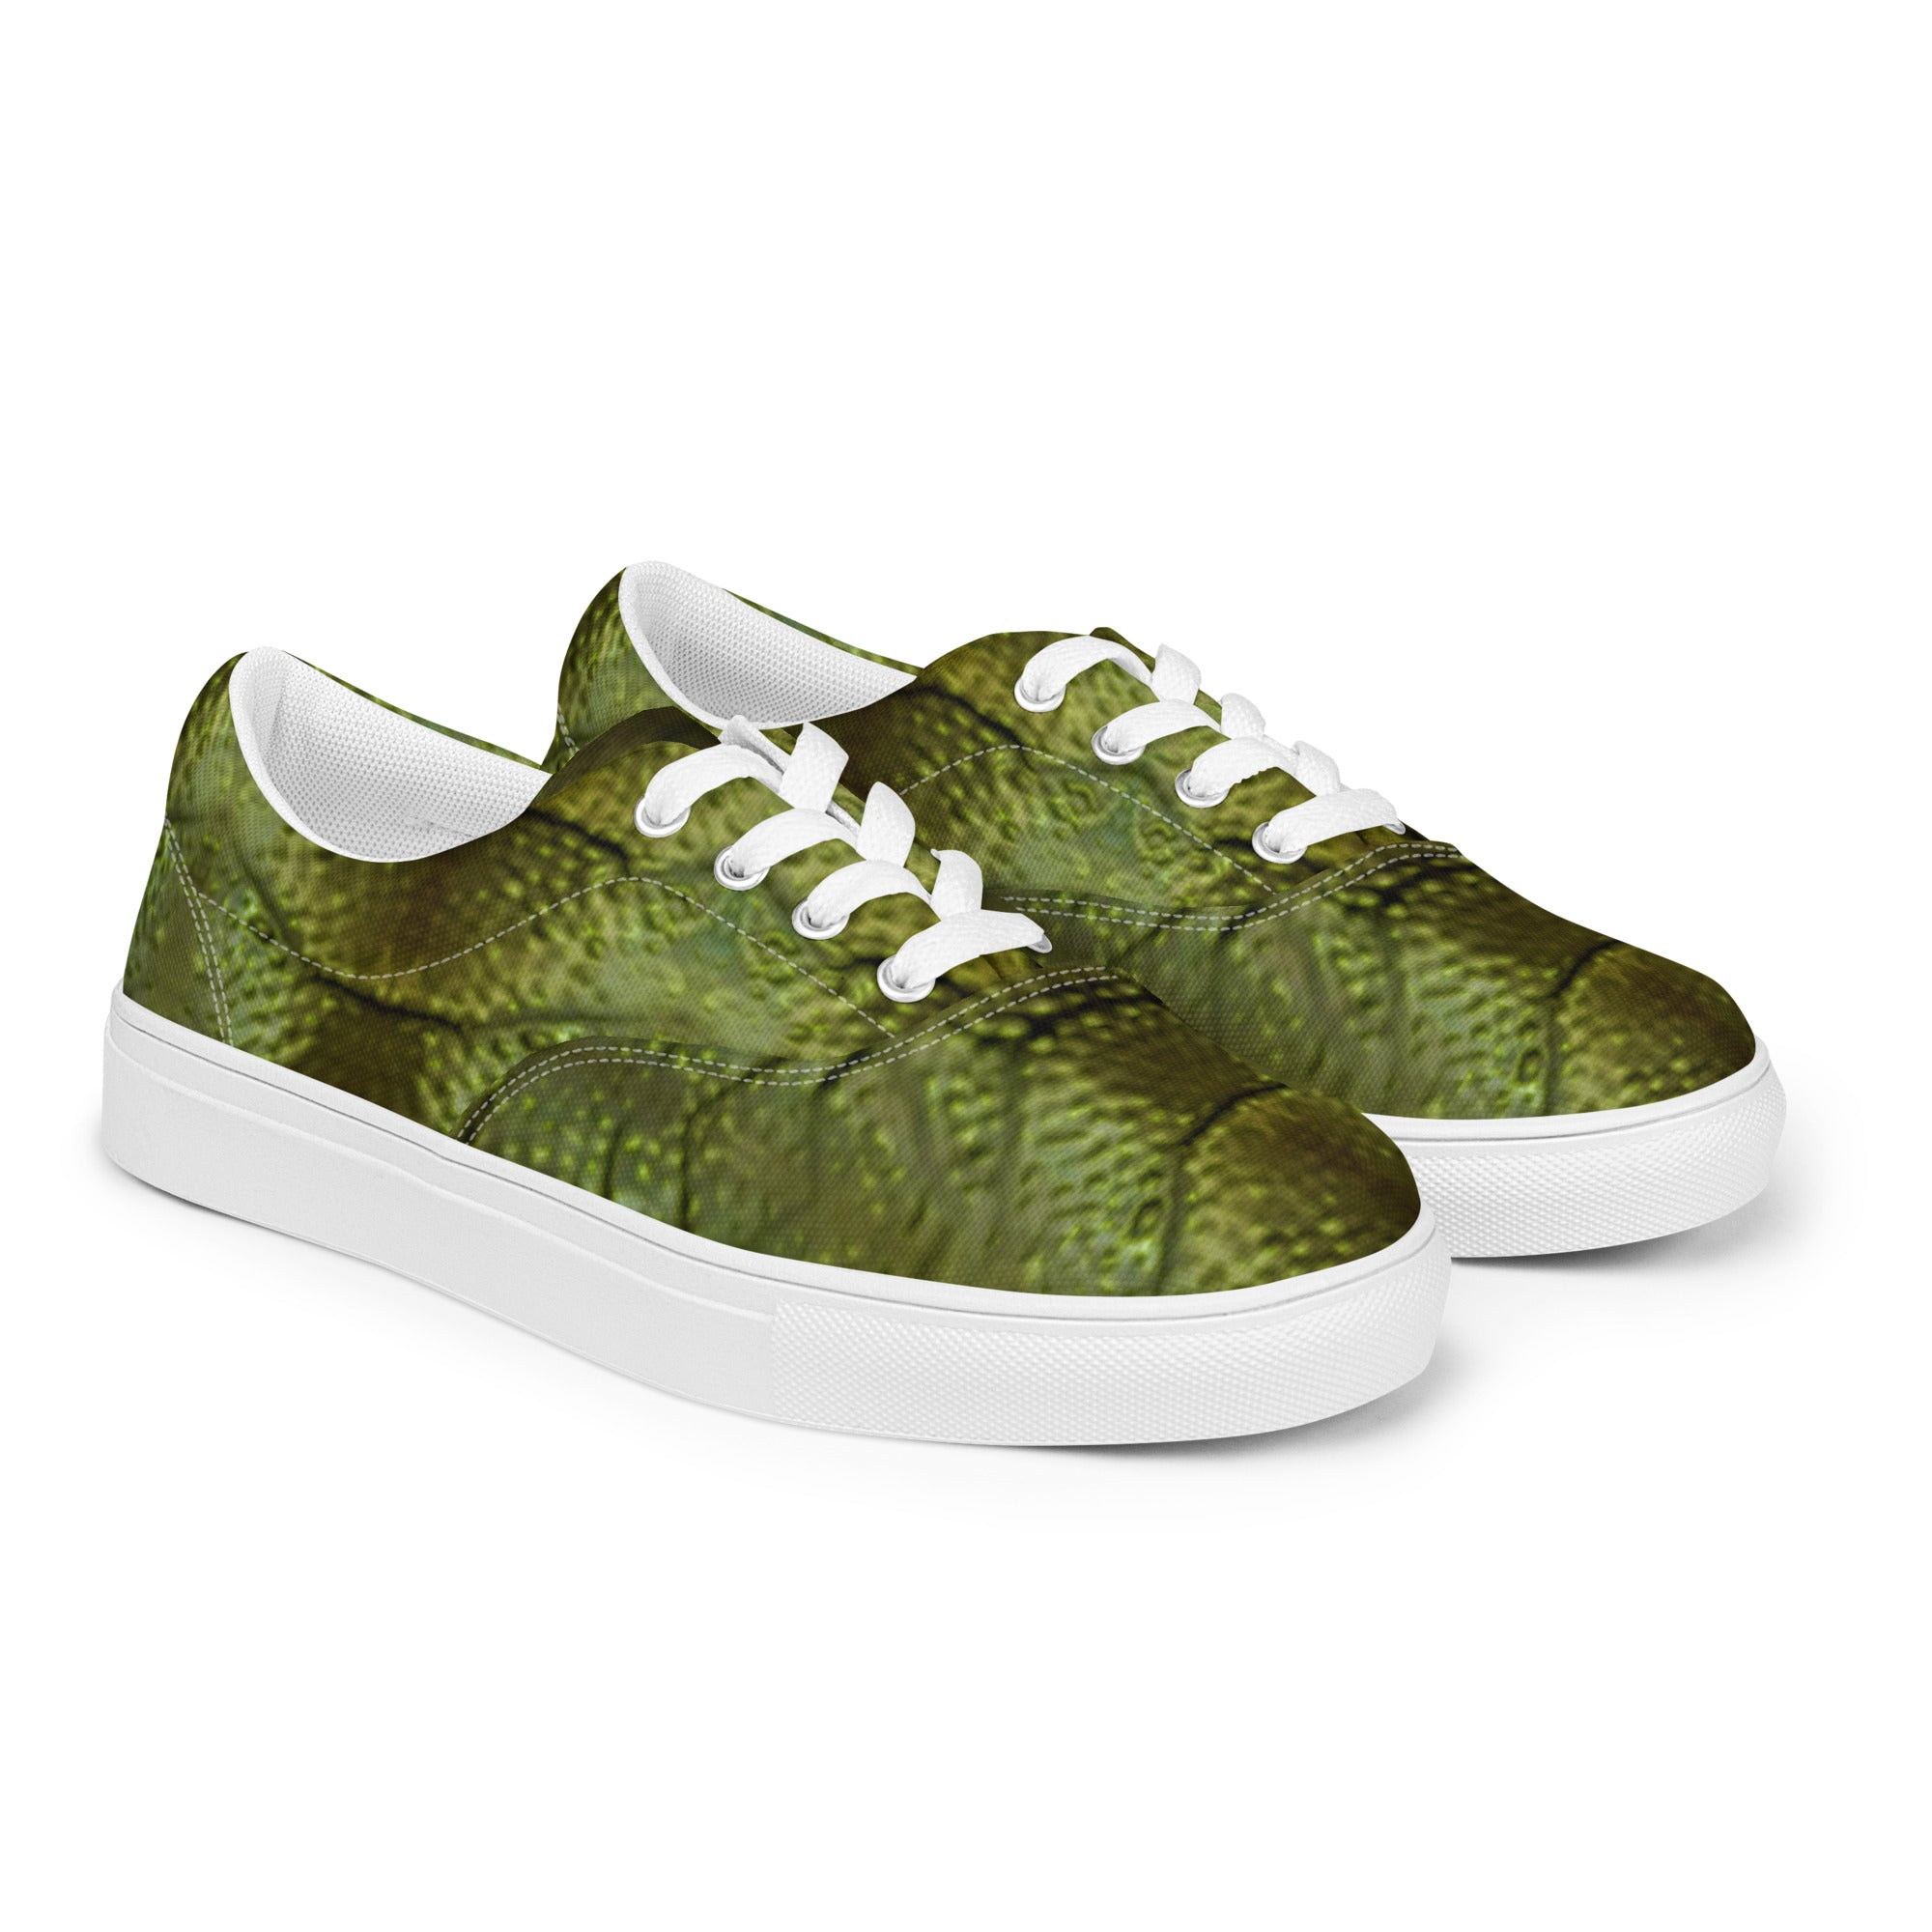 Creature from the Black Lagoon Women’s Lace-up Canvas Shoes